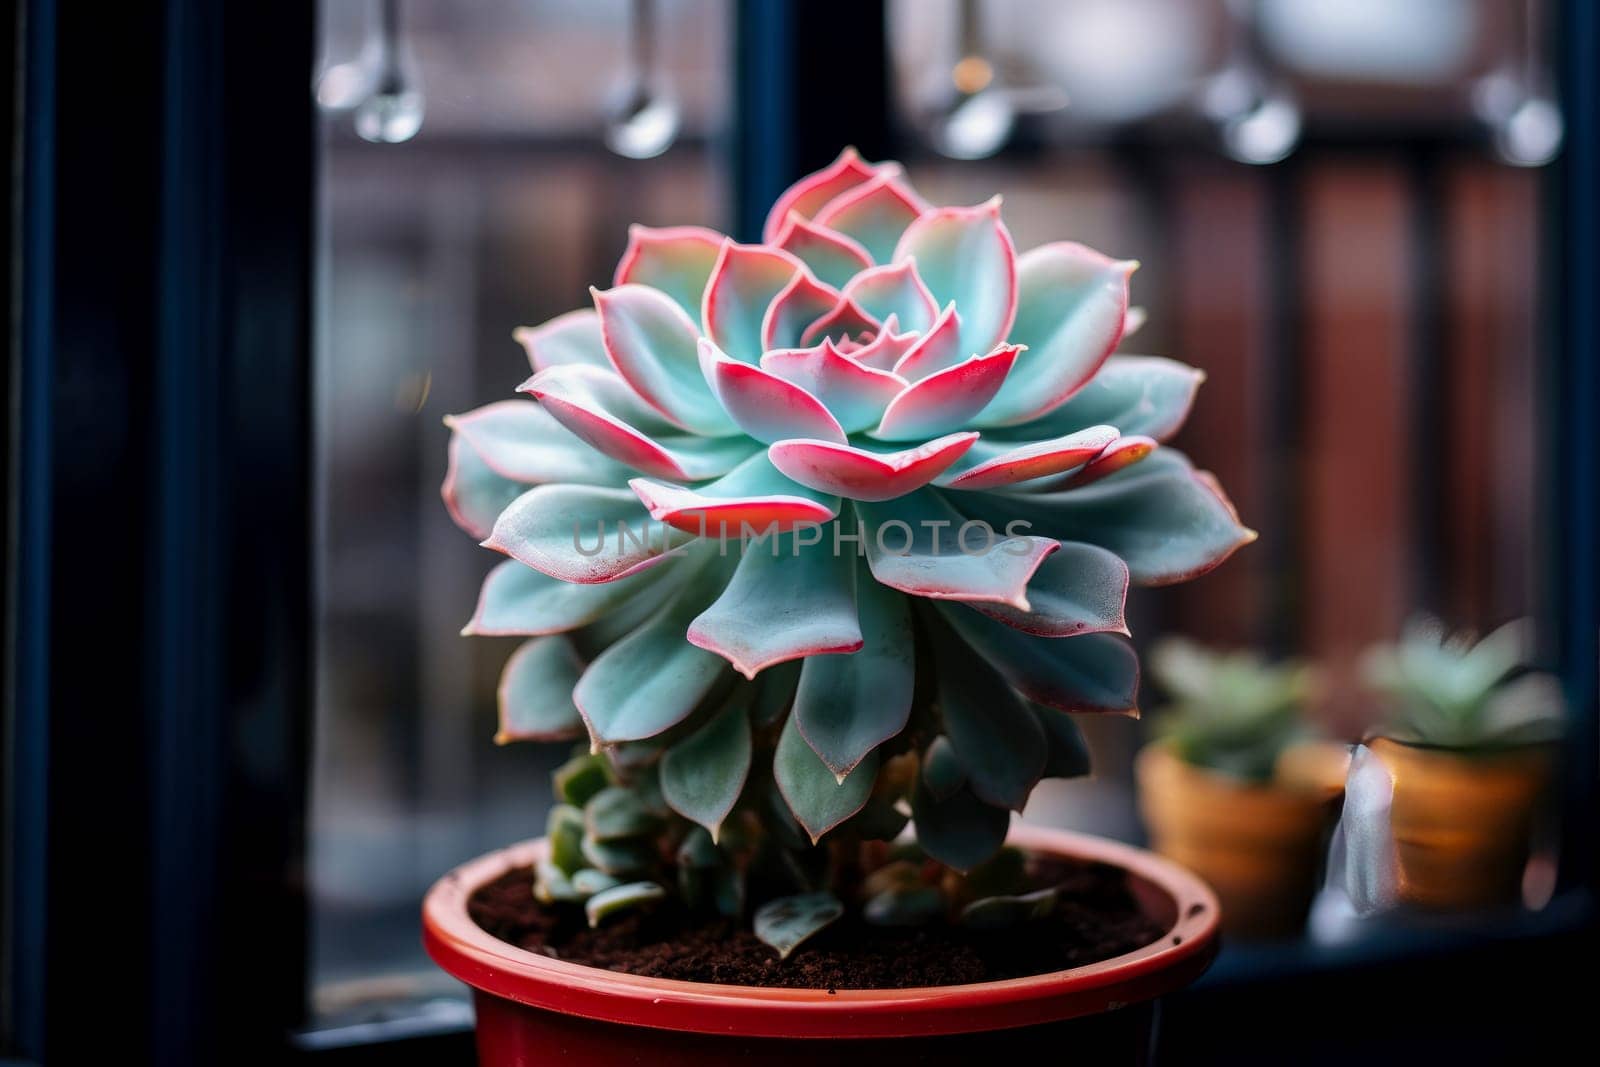 Succulent Echeveria in a pot on a window on a cloudy day. Close up.